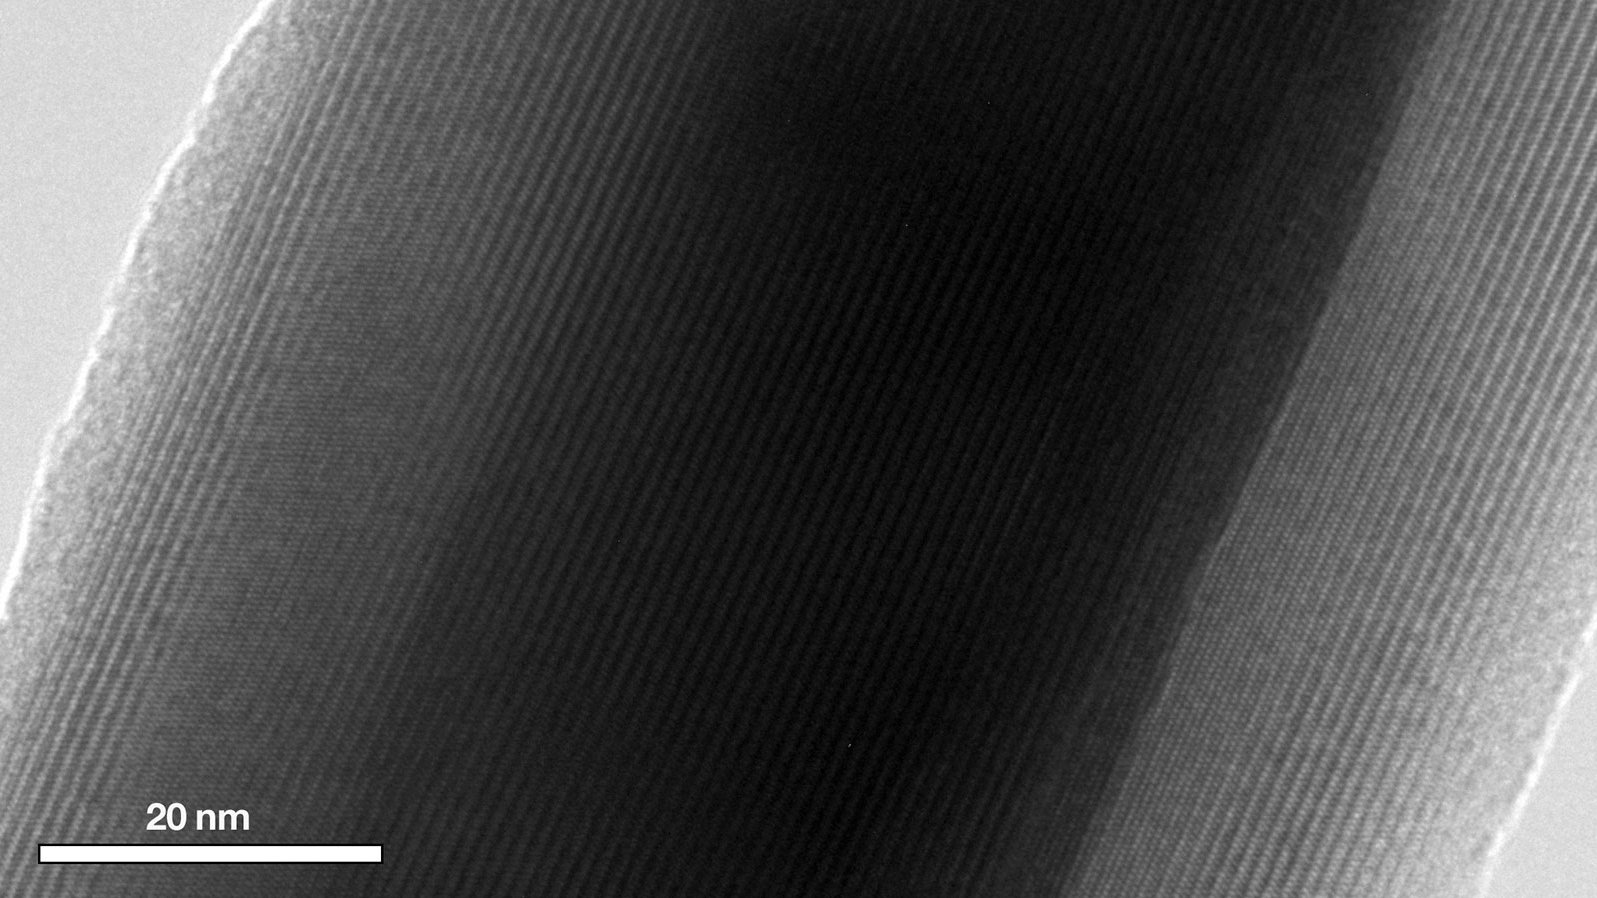 Electron microscopic image of the hybrid material.